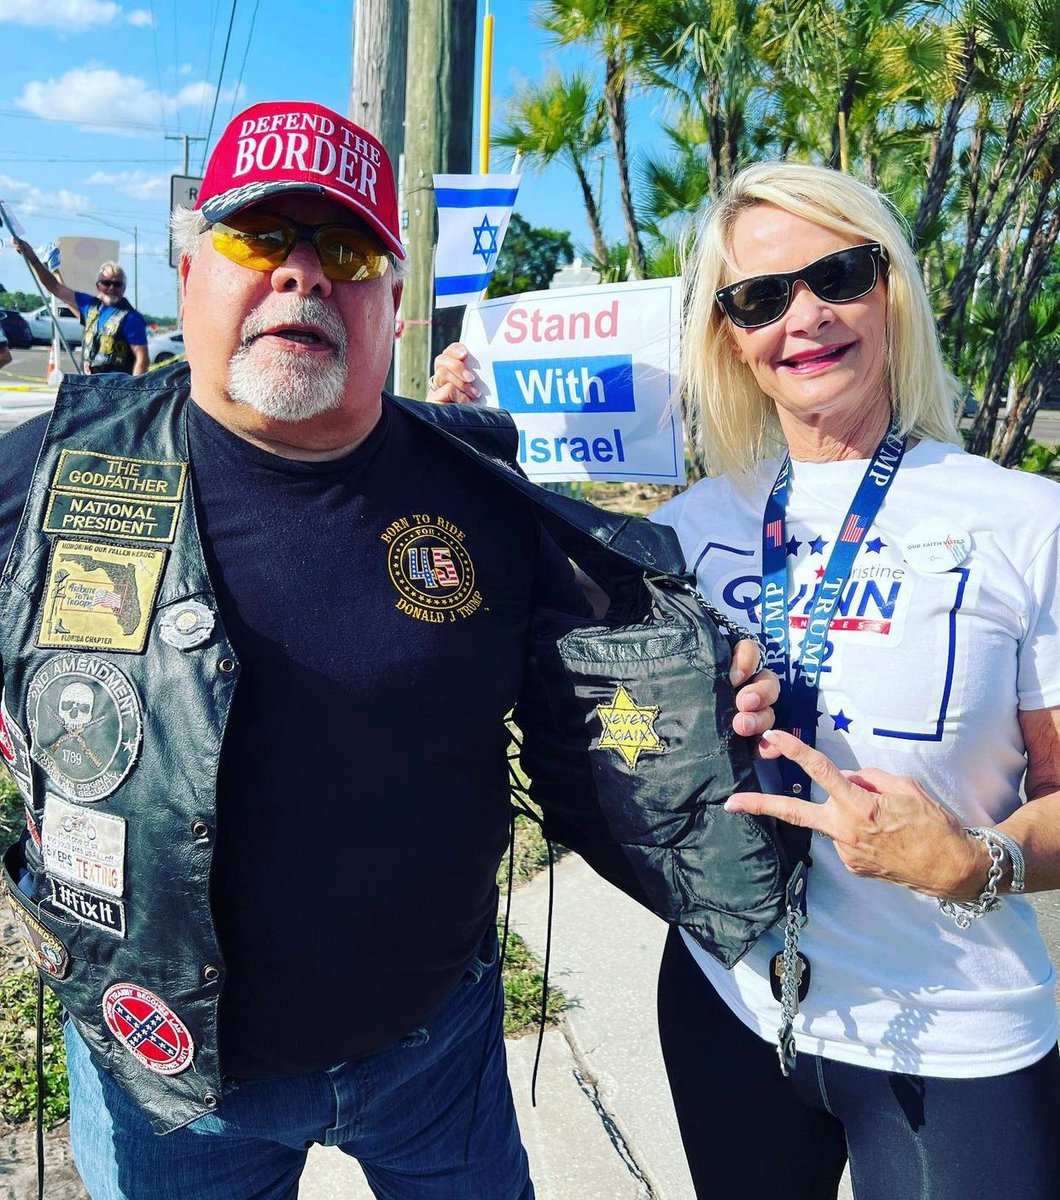 Florida Republican House candidate Christine Quinn showing off a “never again” Star of David patch worn by a guy who is also wearing a Confederate flag patch.